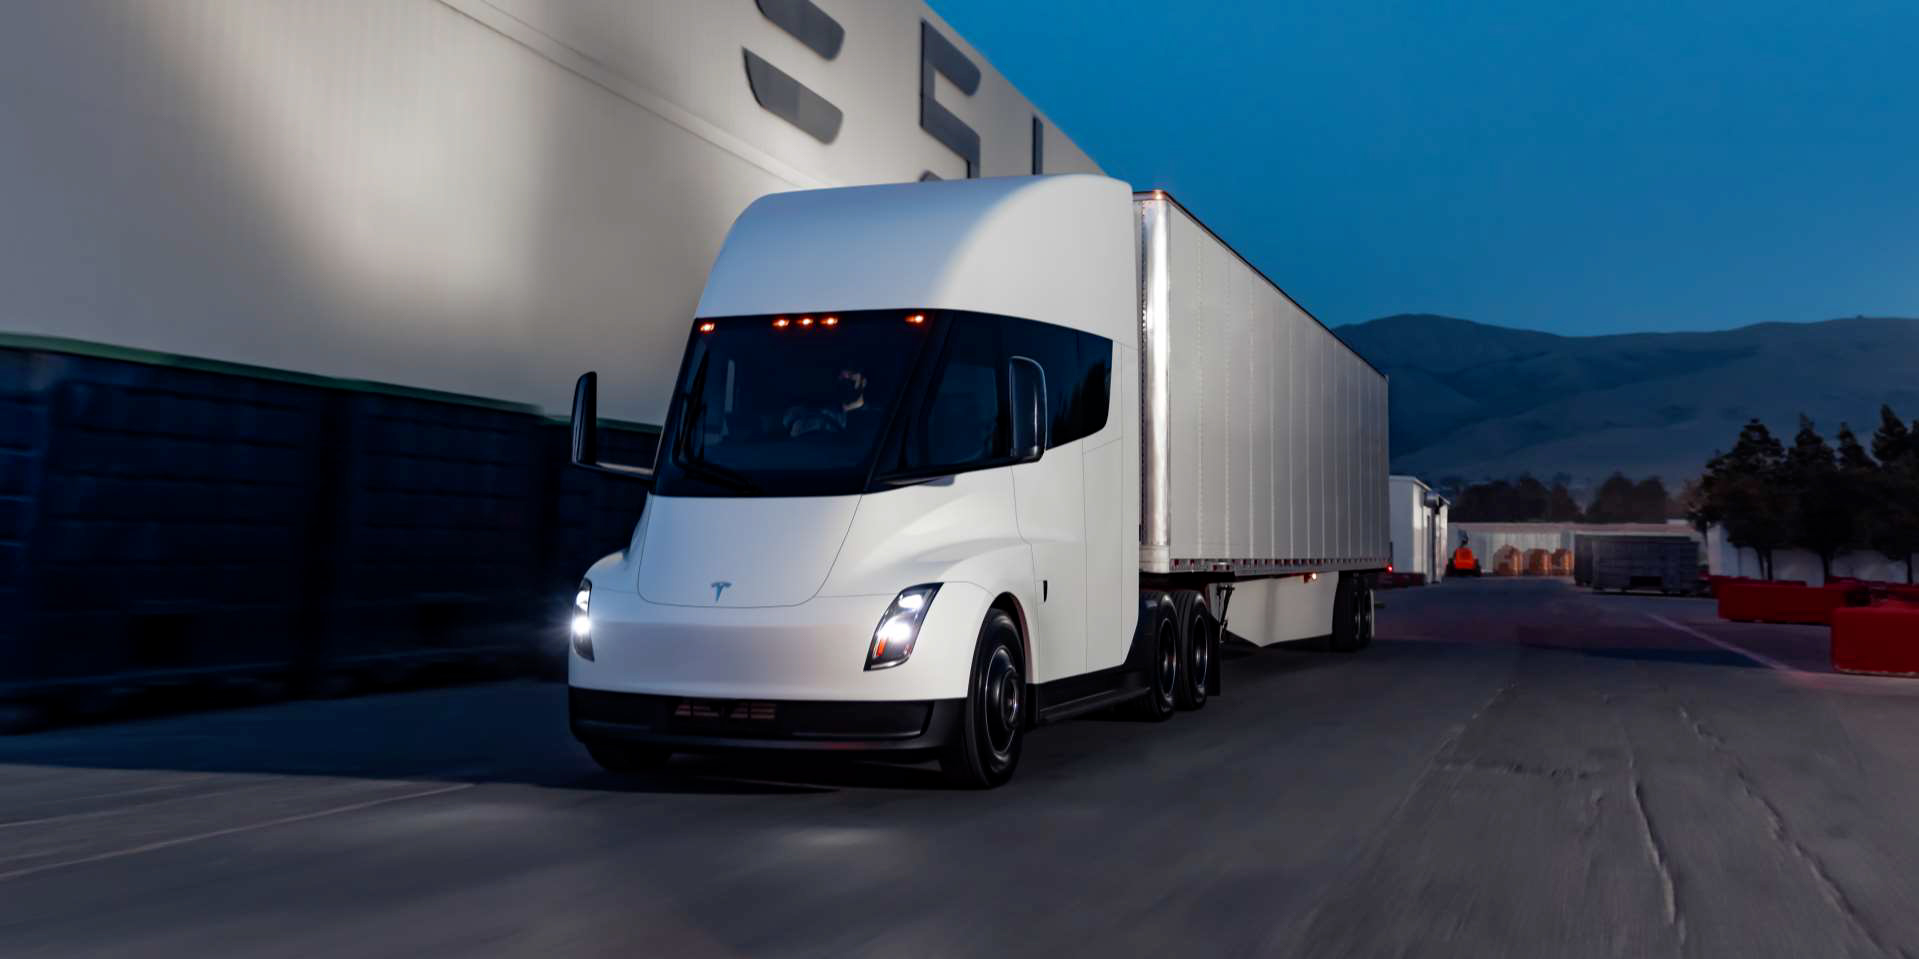 Tesla says Semi deliveries to begin this year, ending battery constraint worries